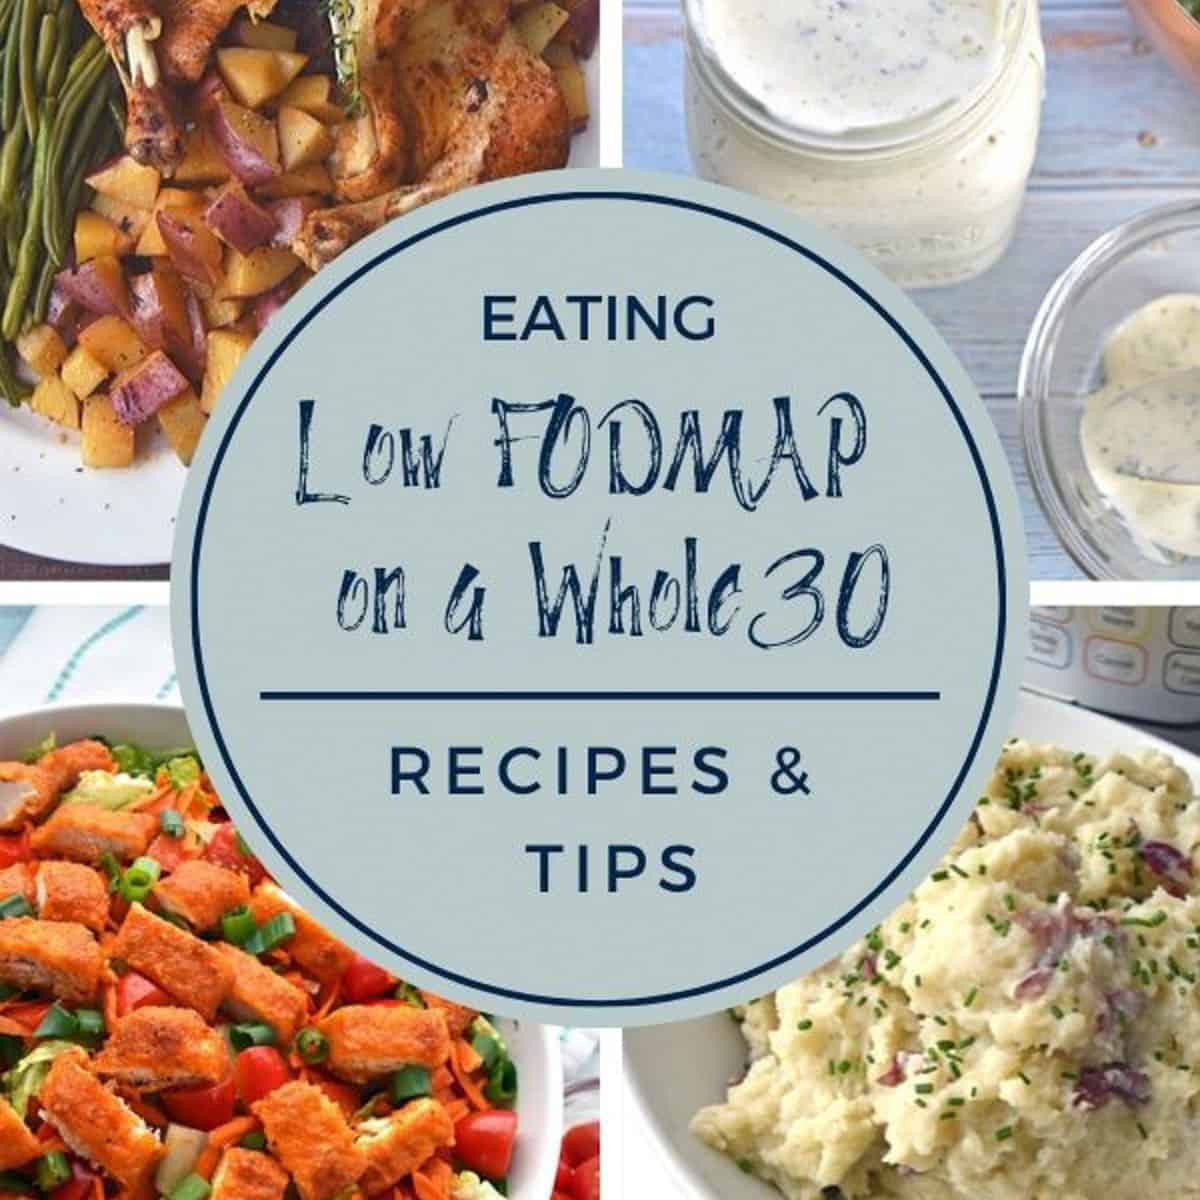 https://www.goodnomshoney.com/wp-content/uploads/2020/01/Eating-Low-FODMAP-on-a-Whole30-Recipes-and-Tips-Featured-V2.jpg